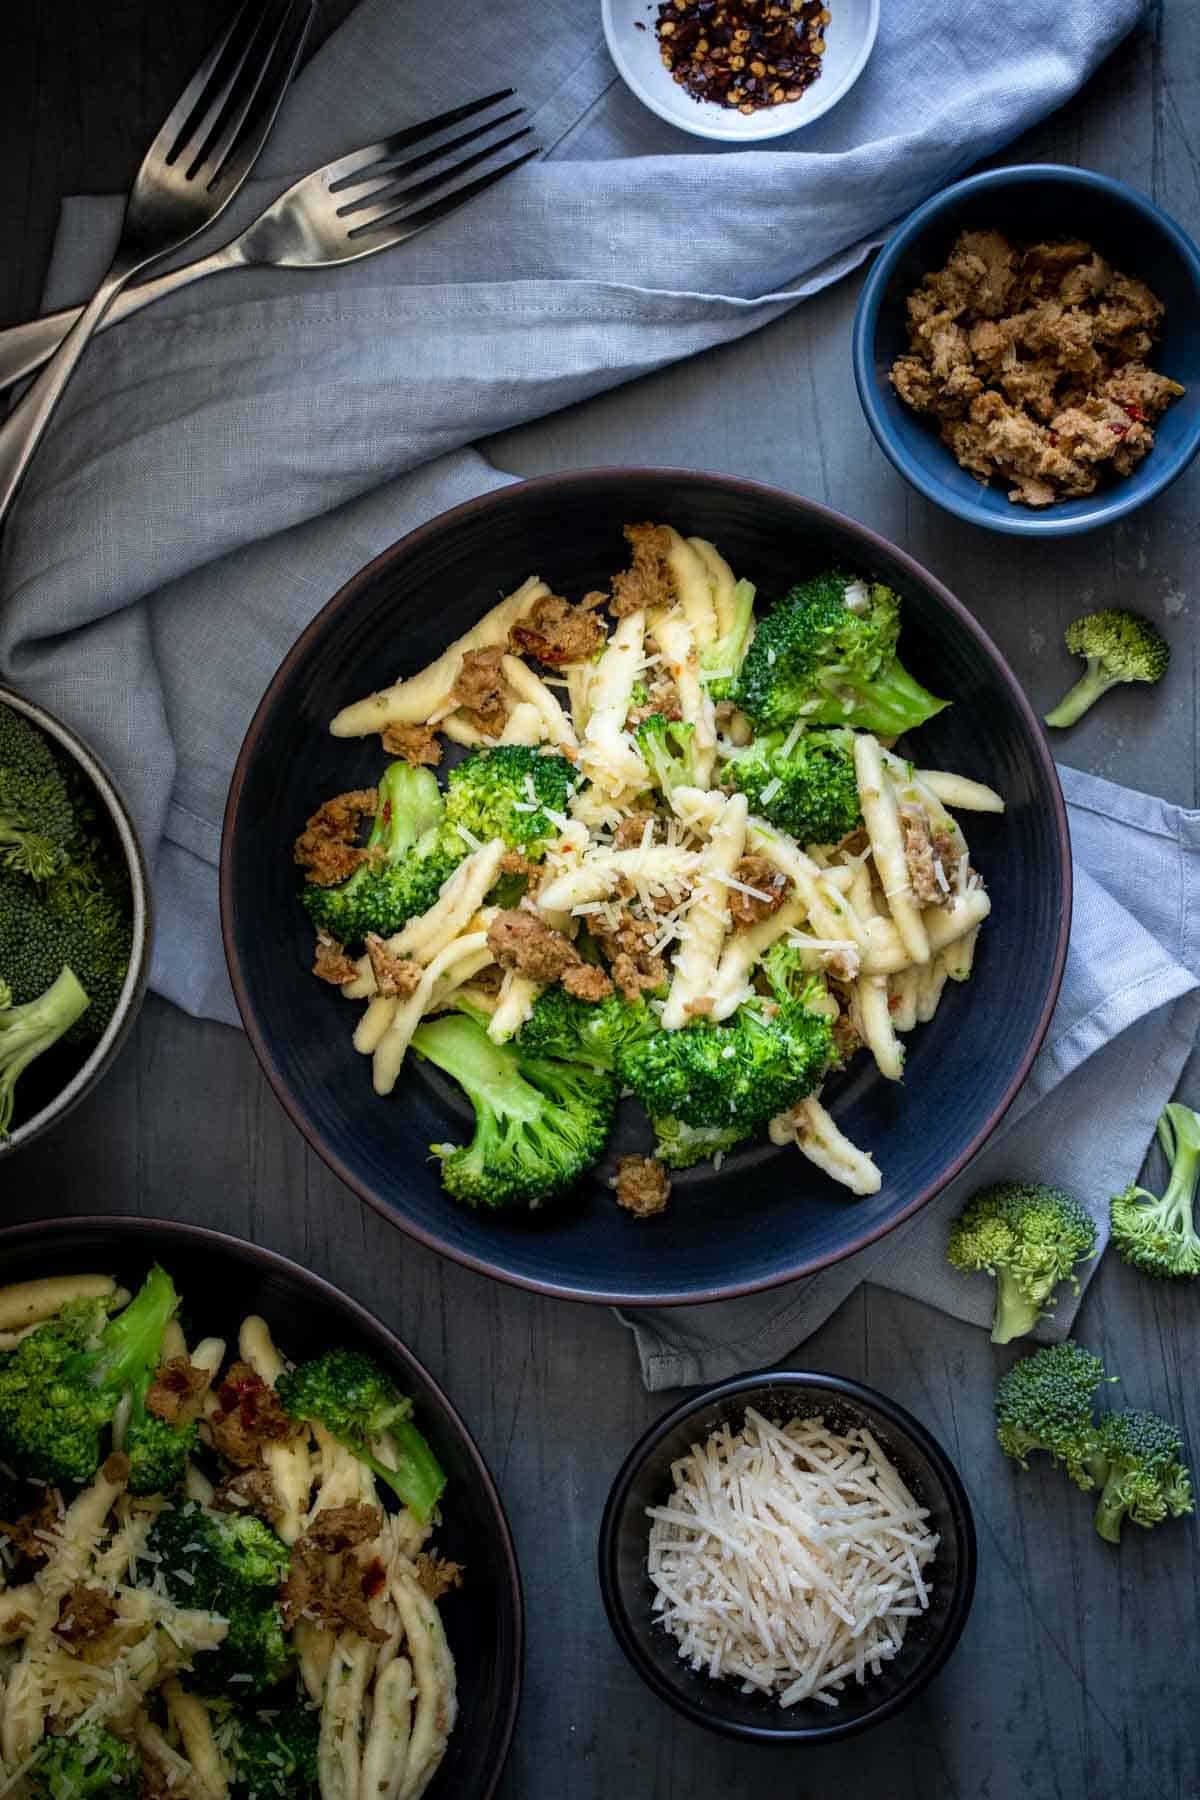 Two black bowls filled with cavatelli, broccoli and sausage